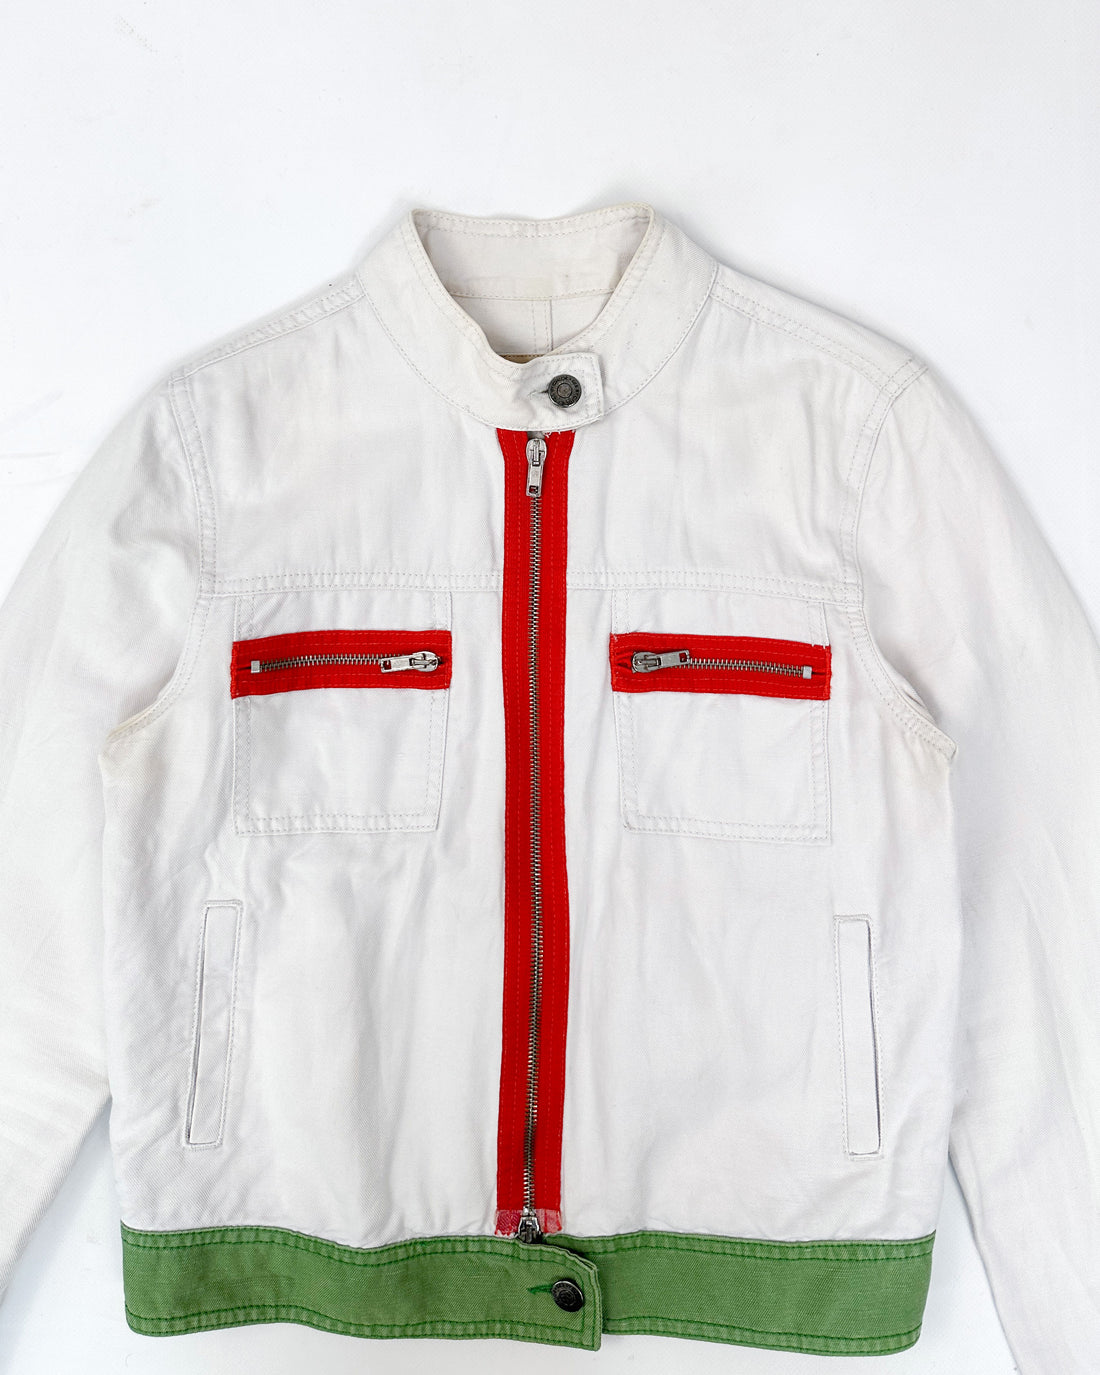 SEE By Chloé White Linen Jacket 2000's